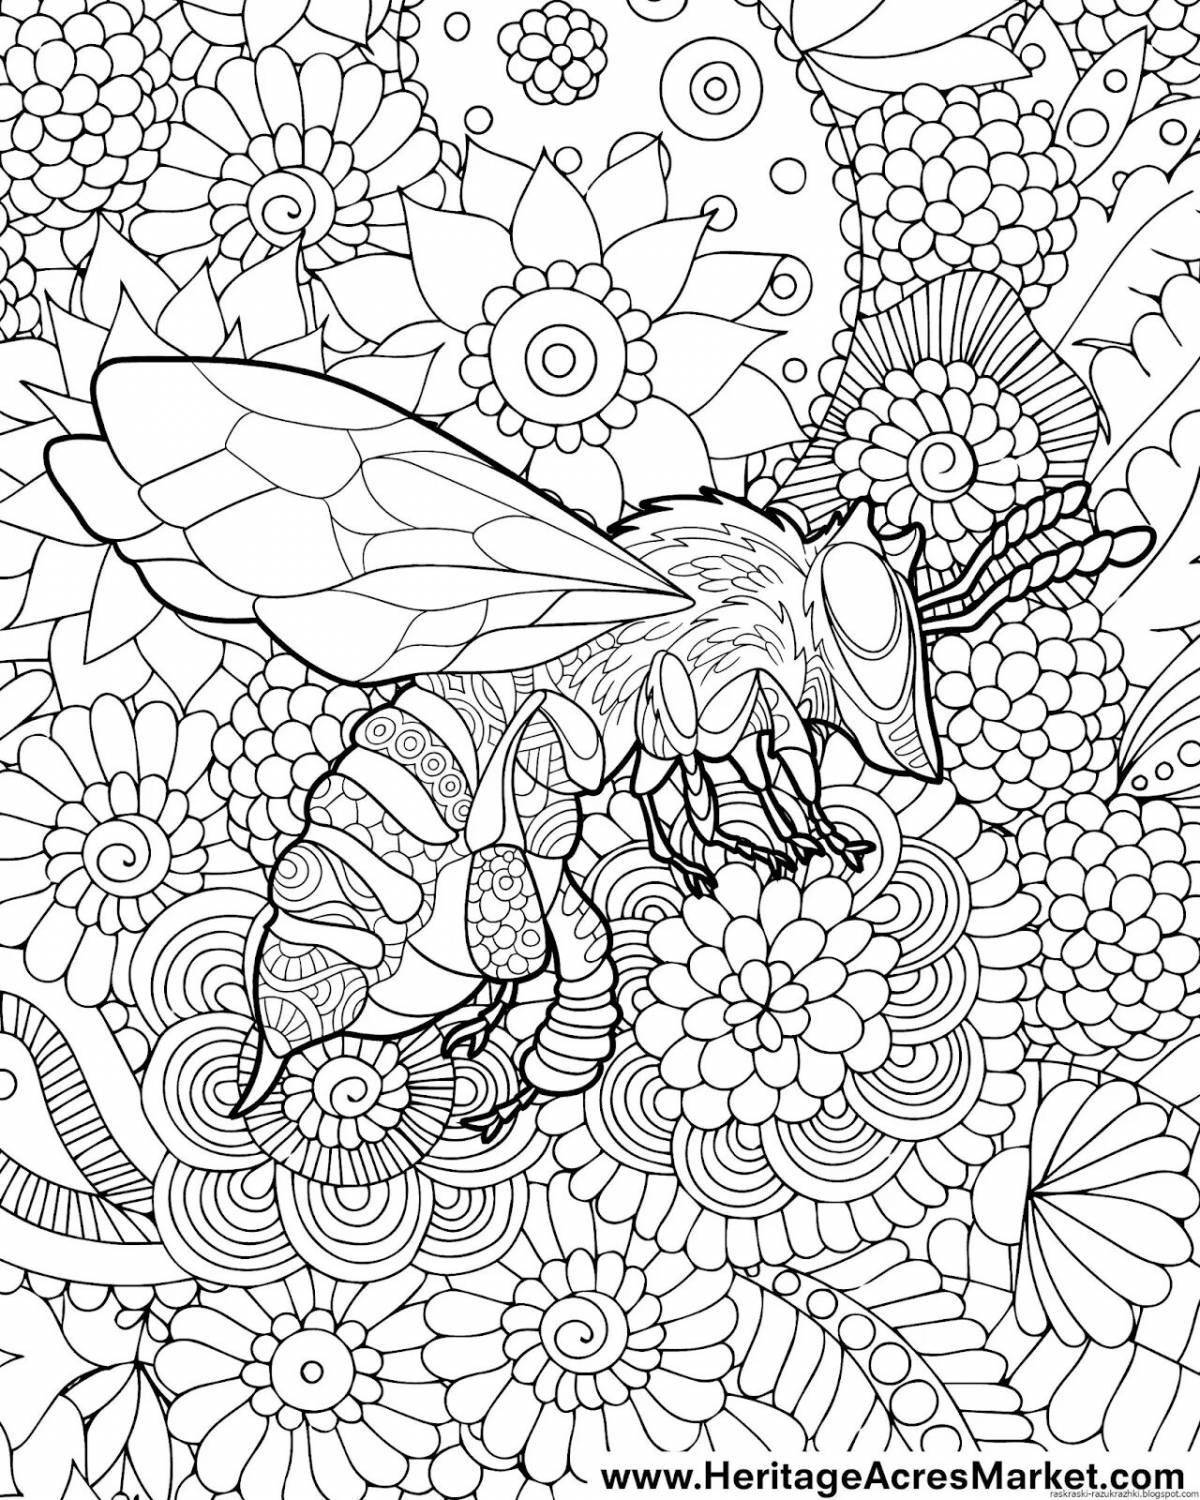 Serene coloring pages are best for adults